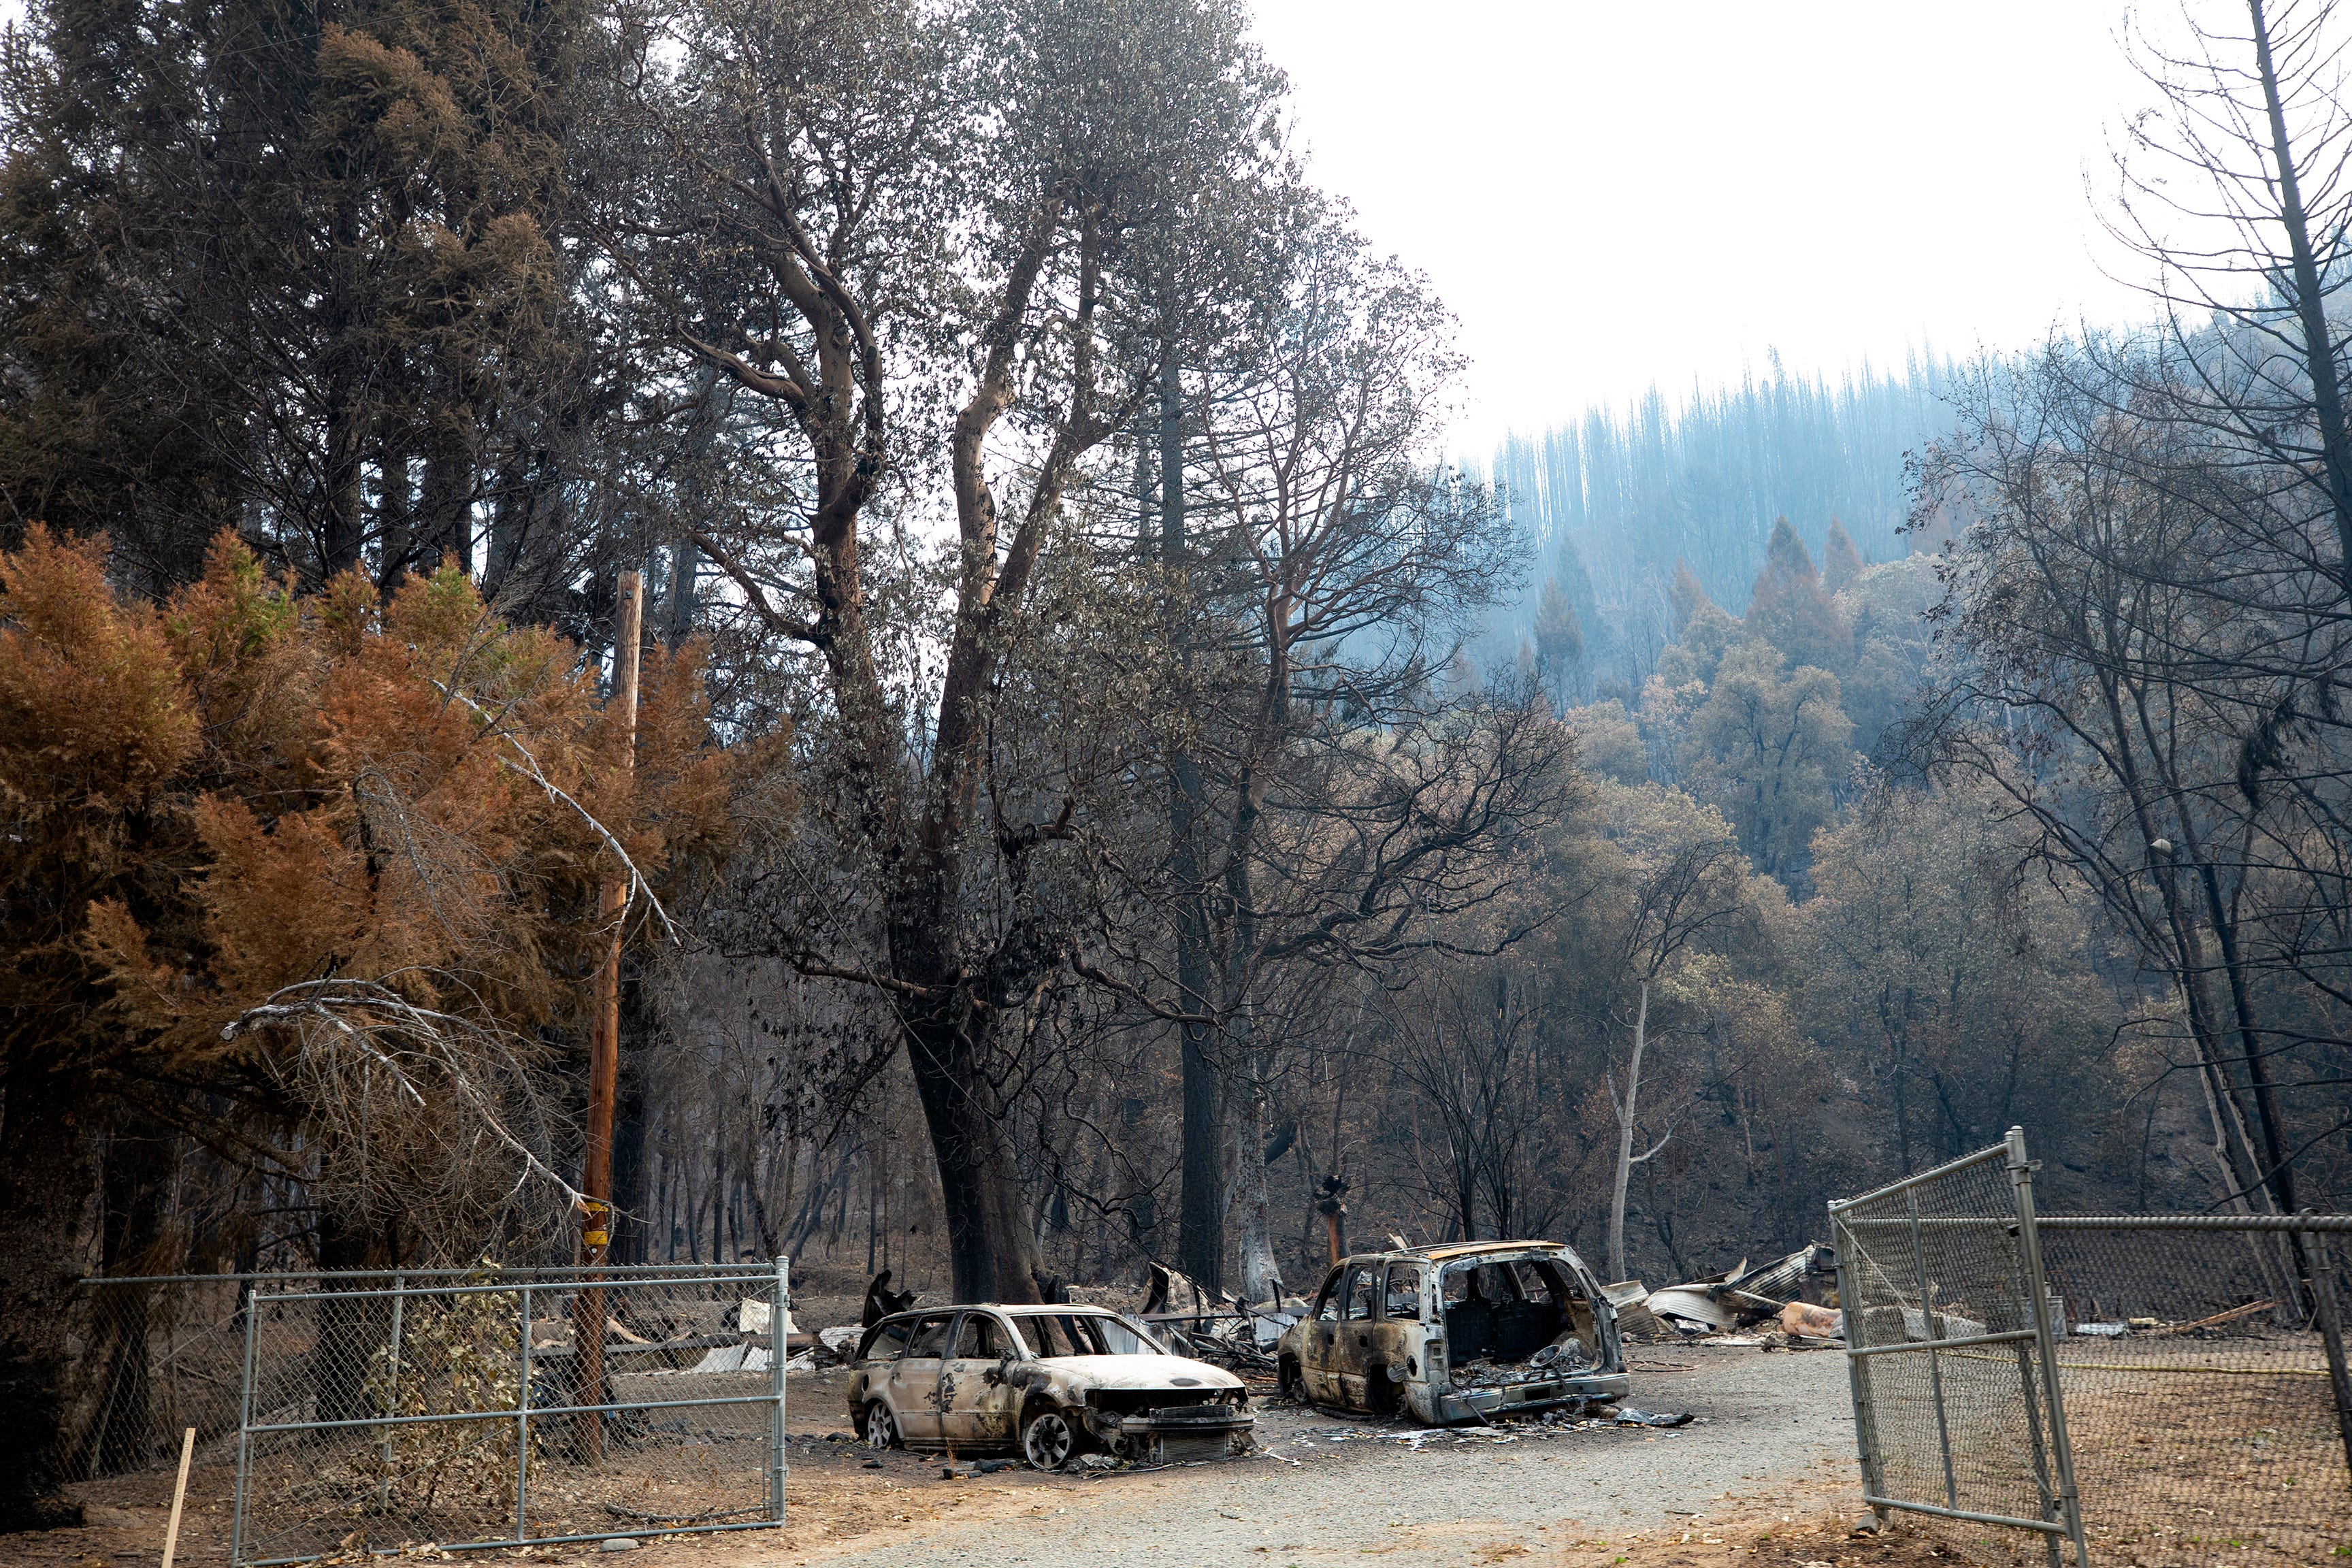 The Slater Fire burned through the town of Happy Camp, destroying about 160 homes on Sept. 9, 2020.